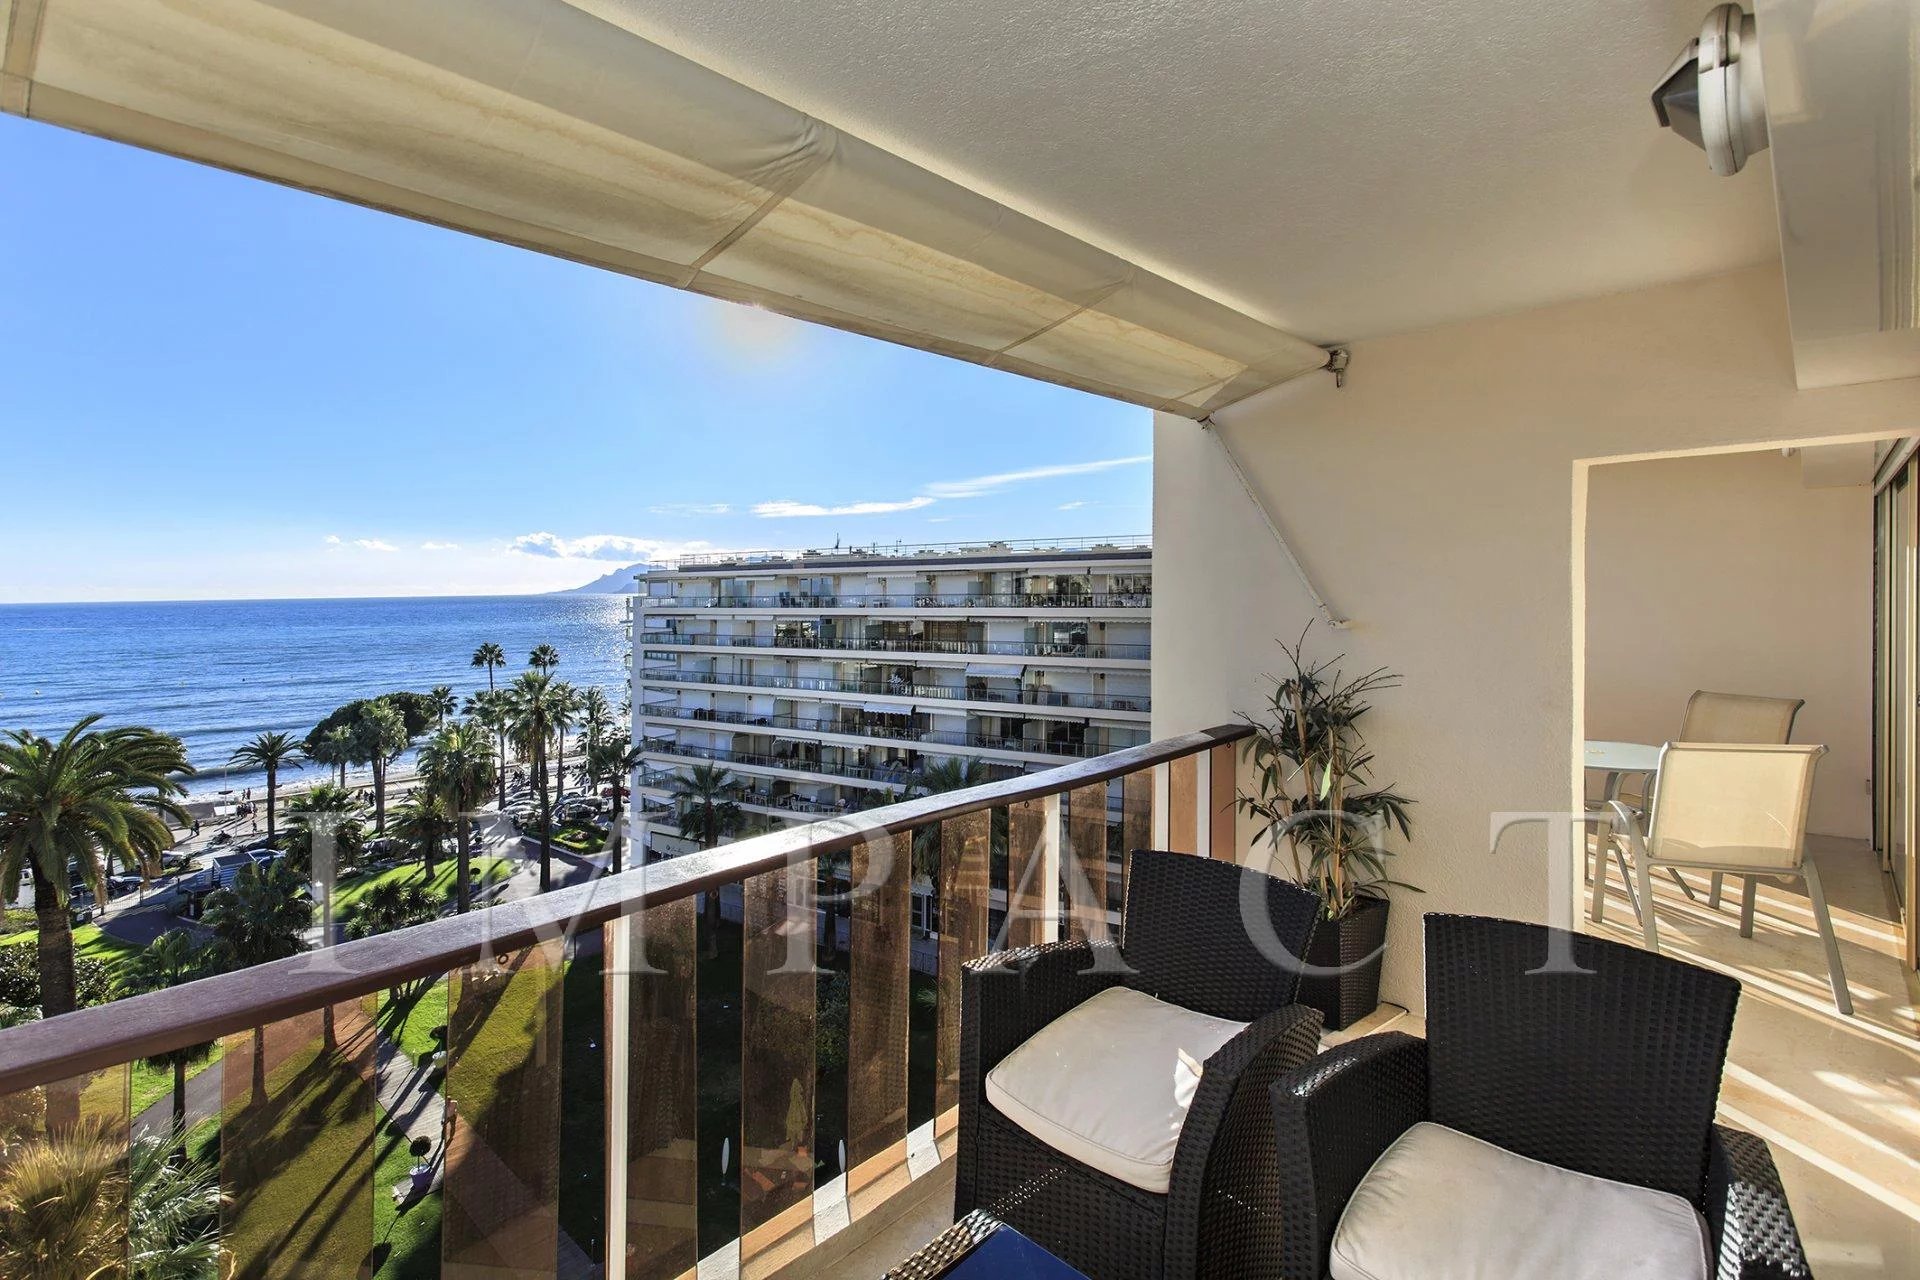 Apartment to rent center of Cannes